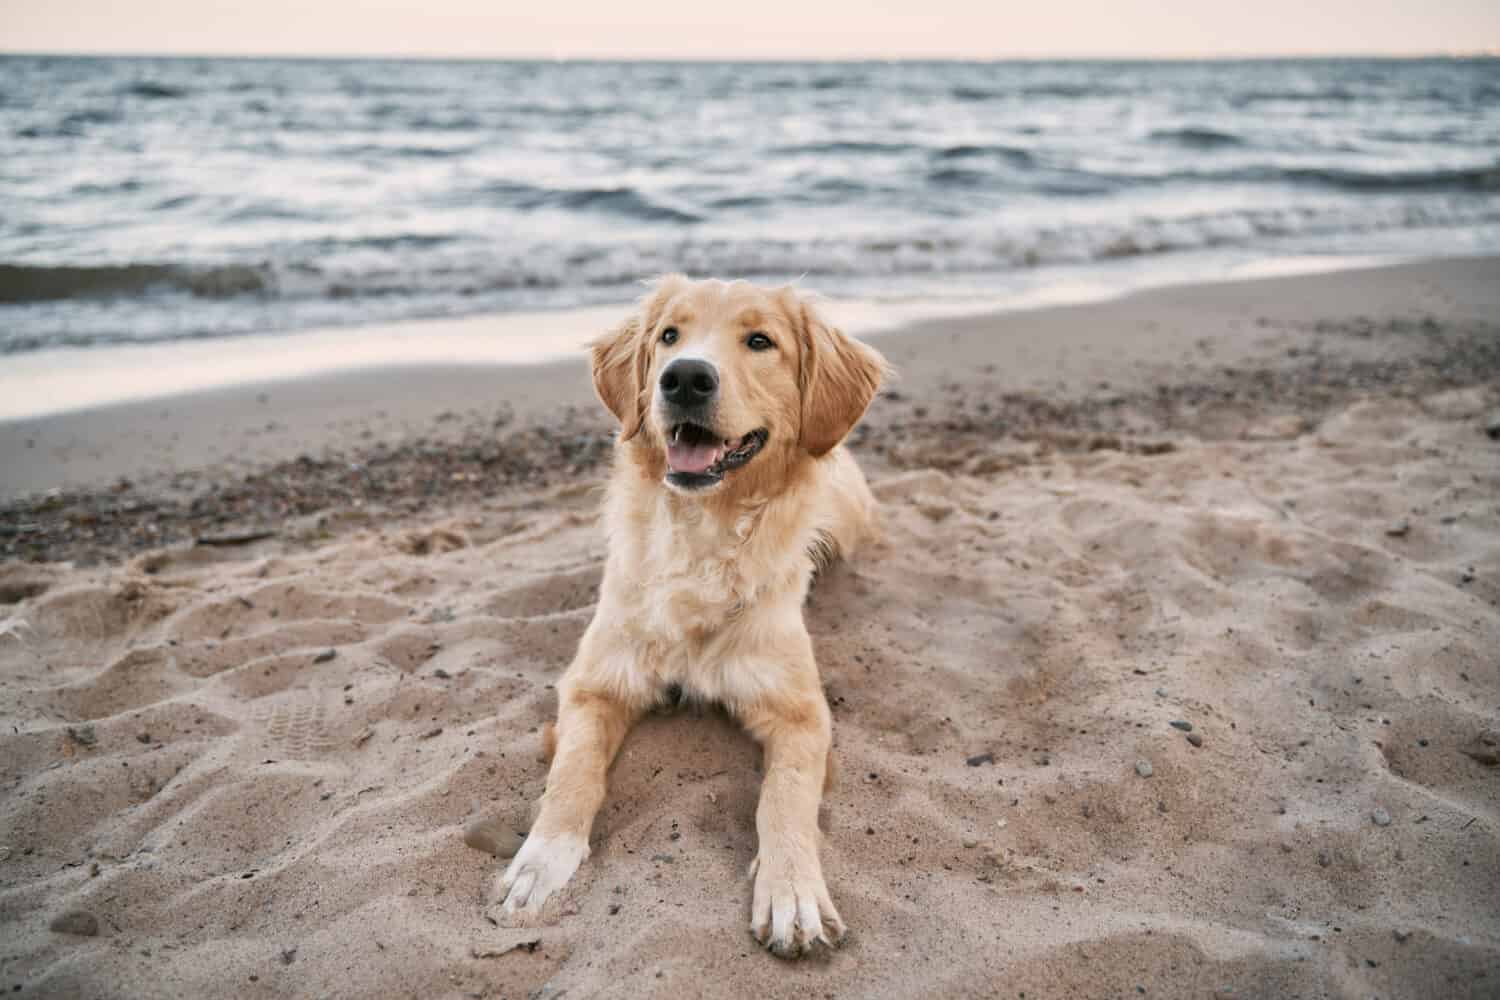 Golden retriever sitting on the sand beach of the Baltic Sea. Concept for the summer adventures of purebreed dog at the seaside vacation.